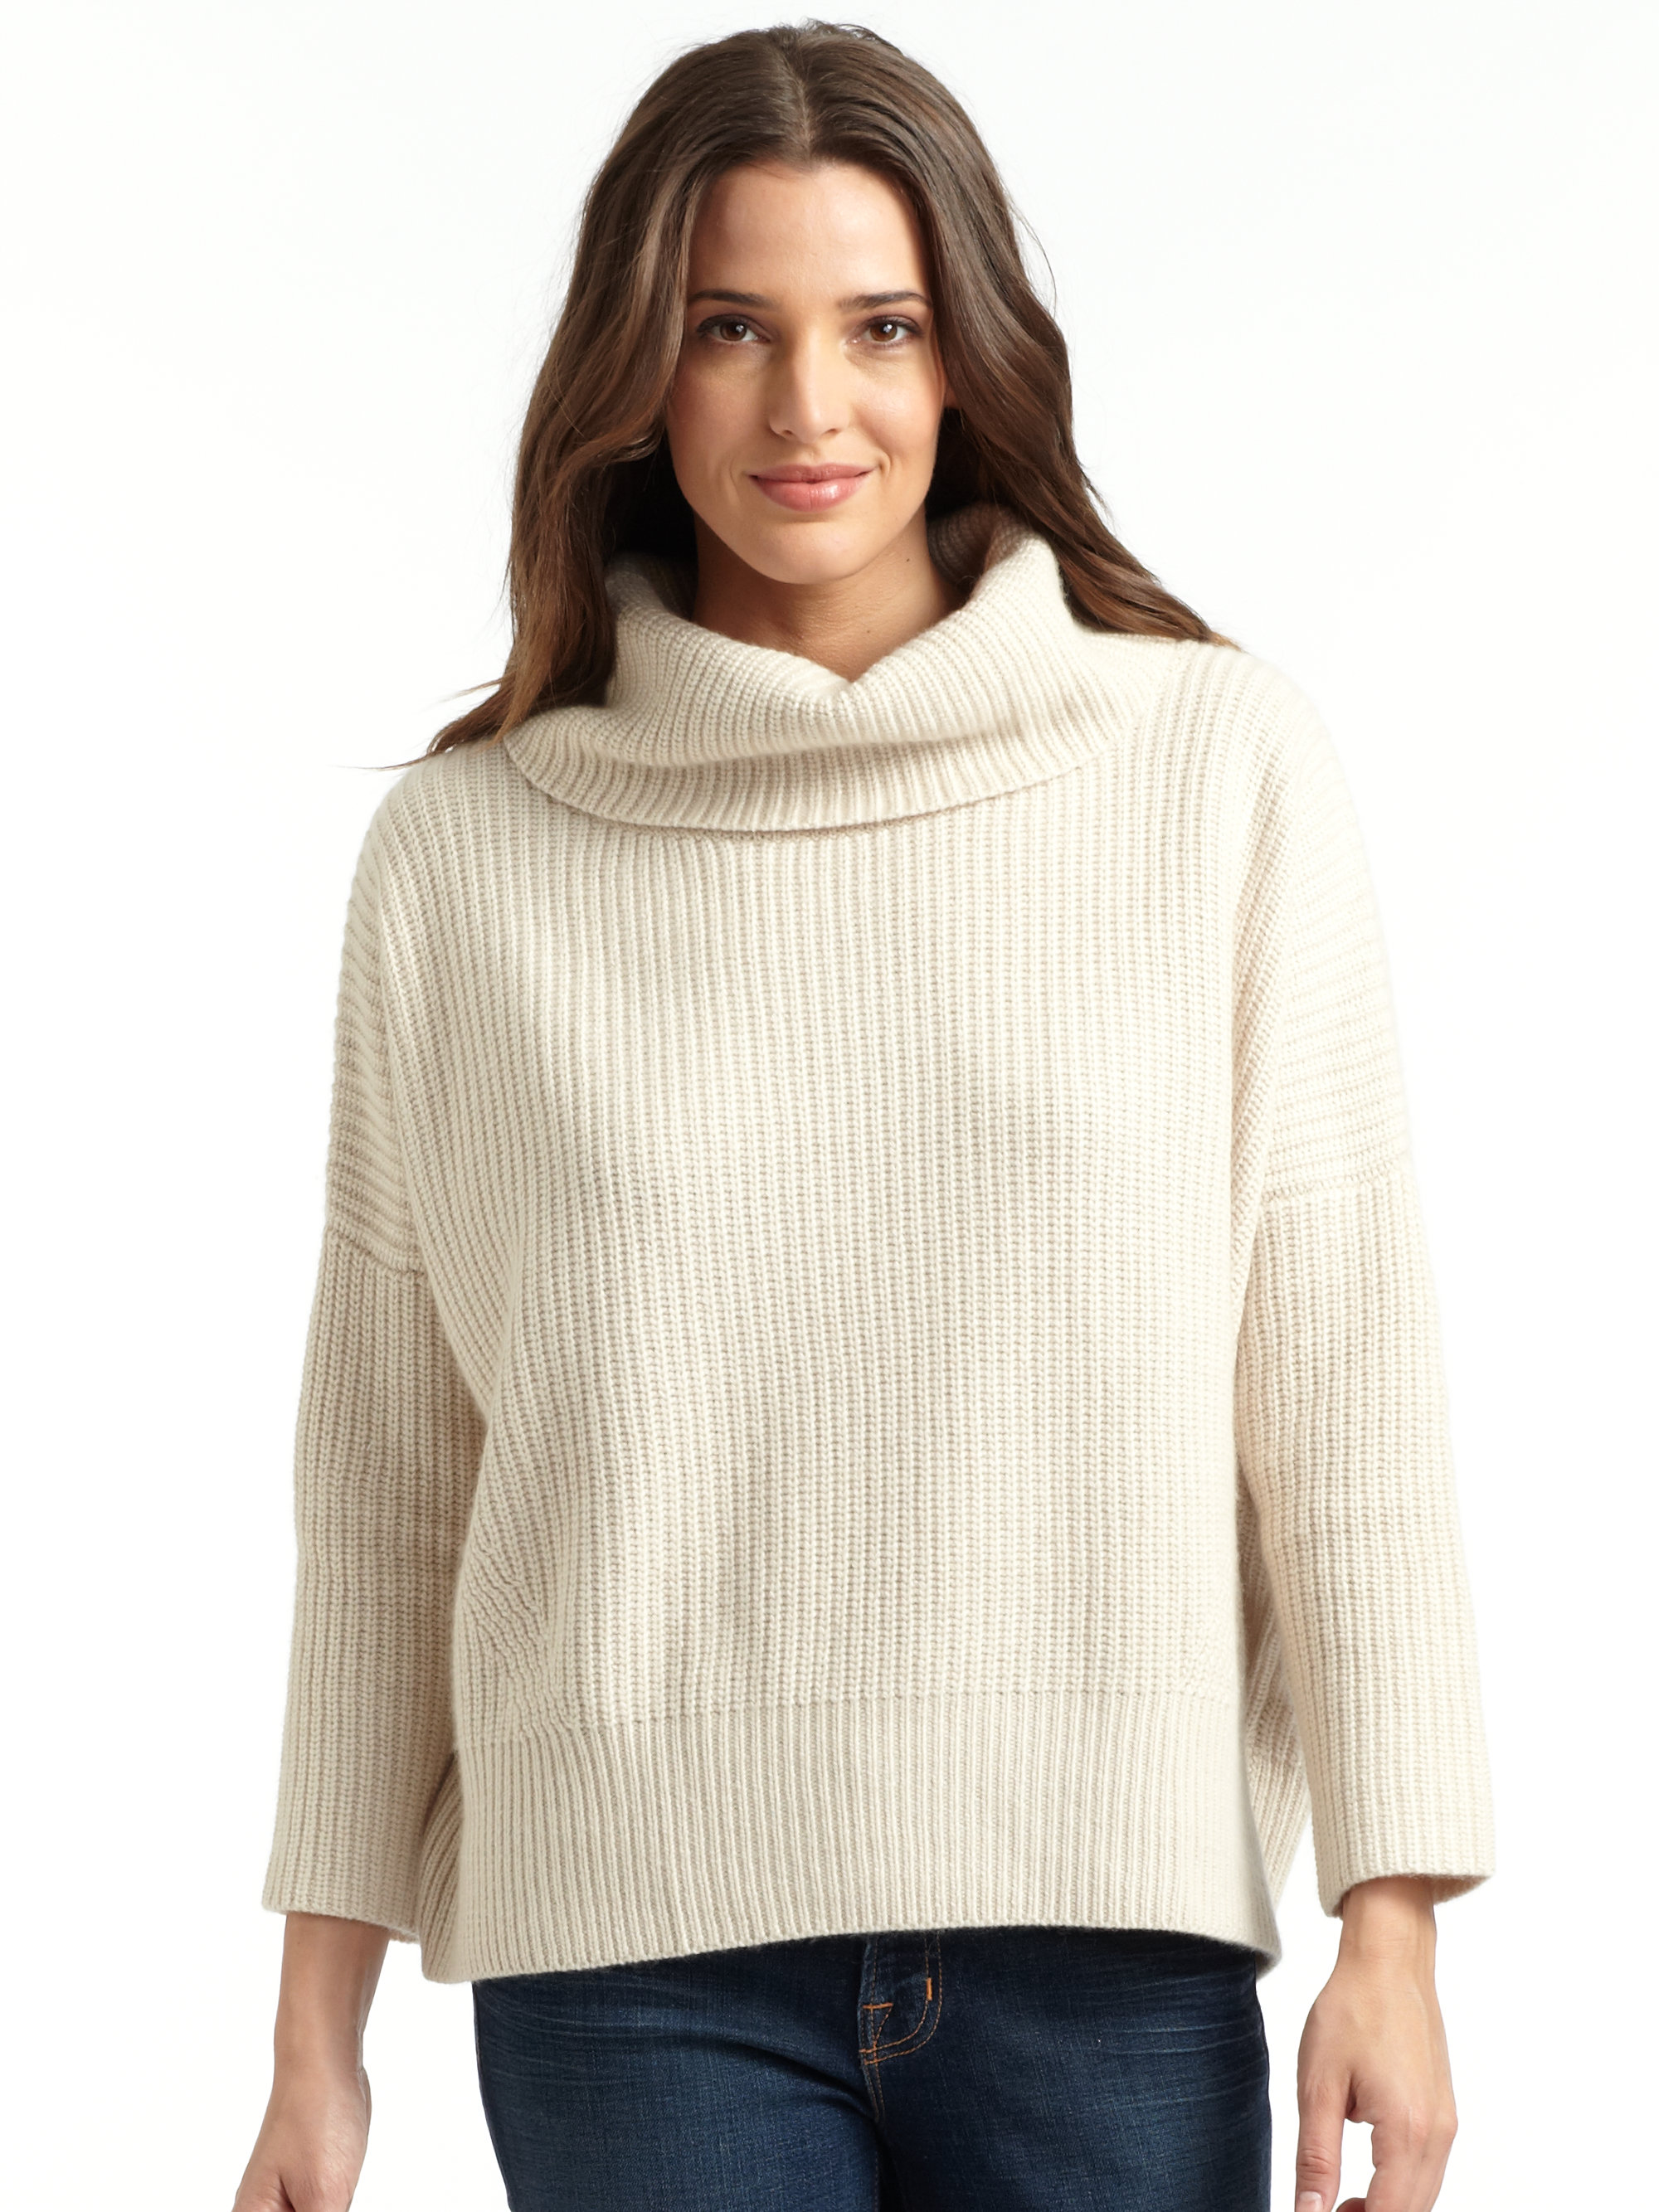 sweater with elbow patches